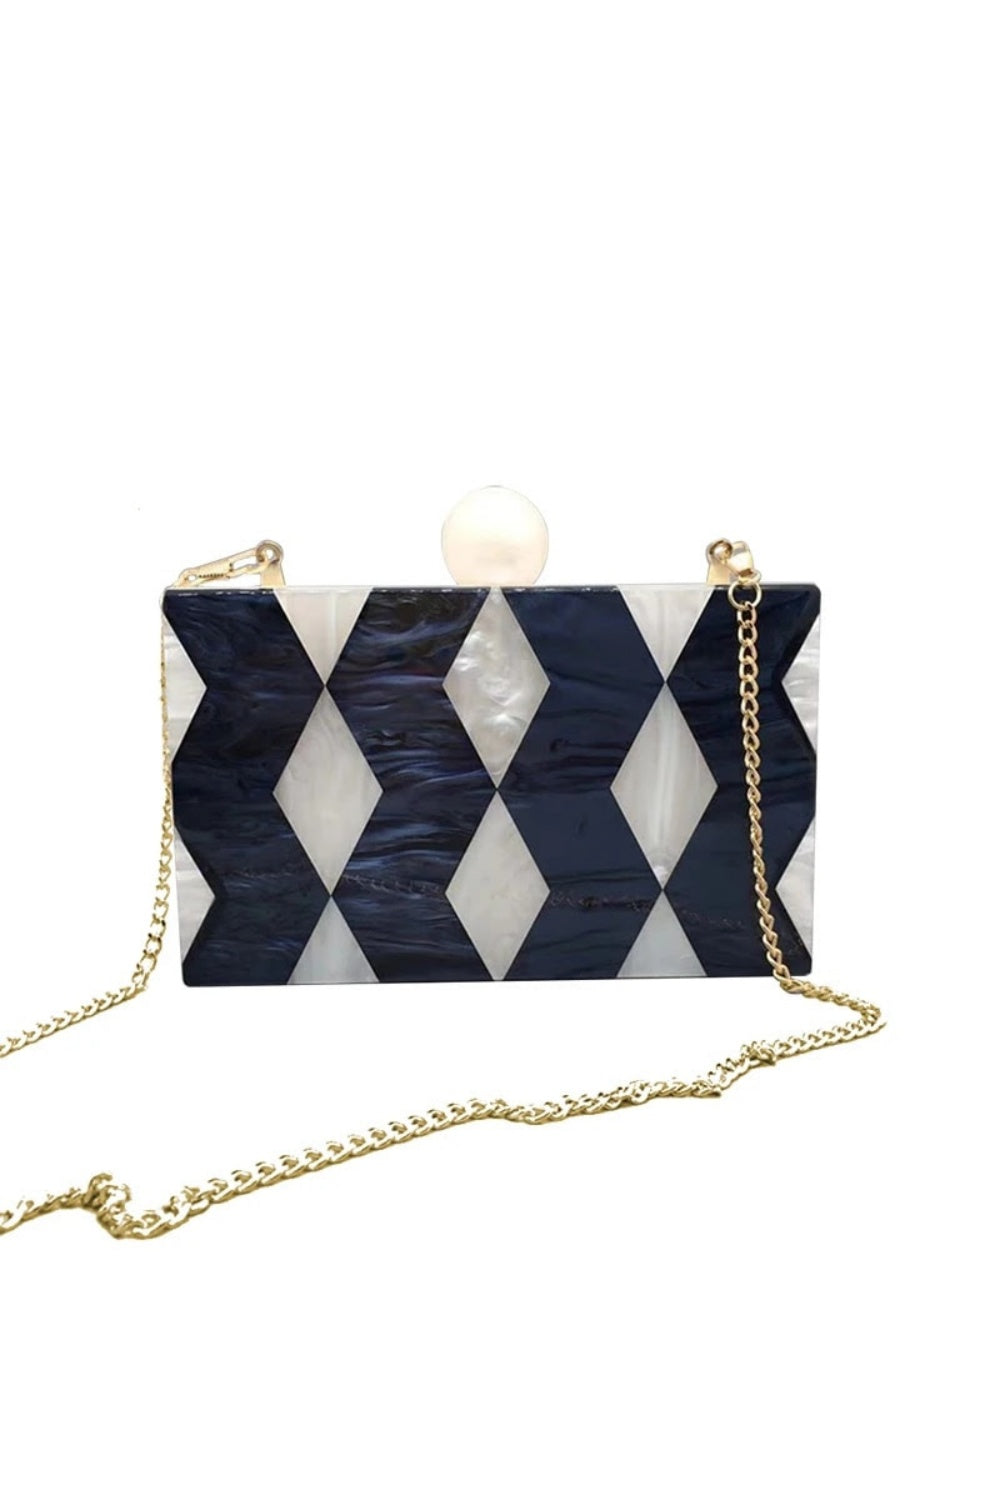 IN THE NAVY CLUTCH